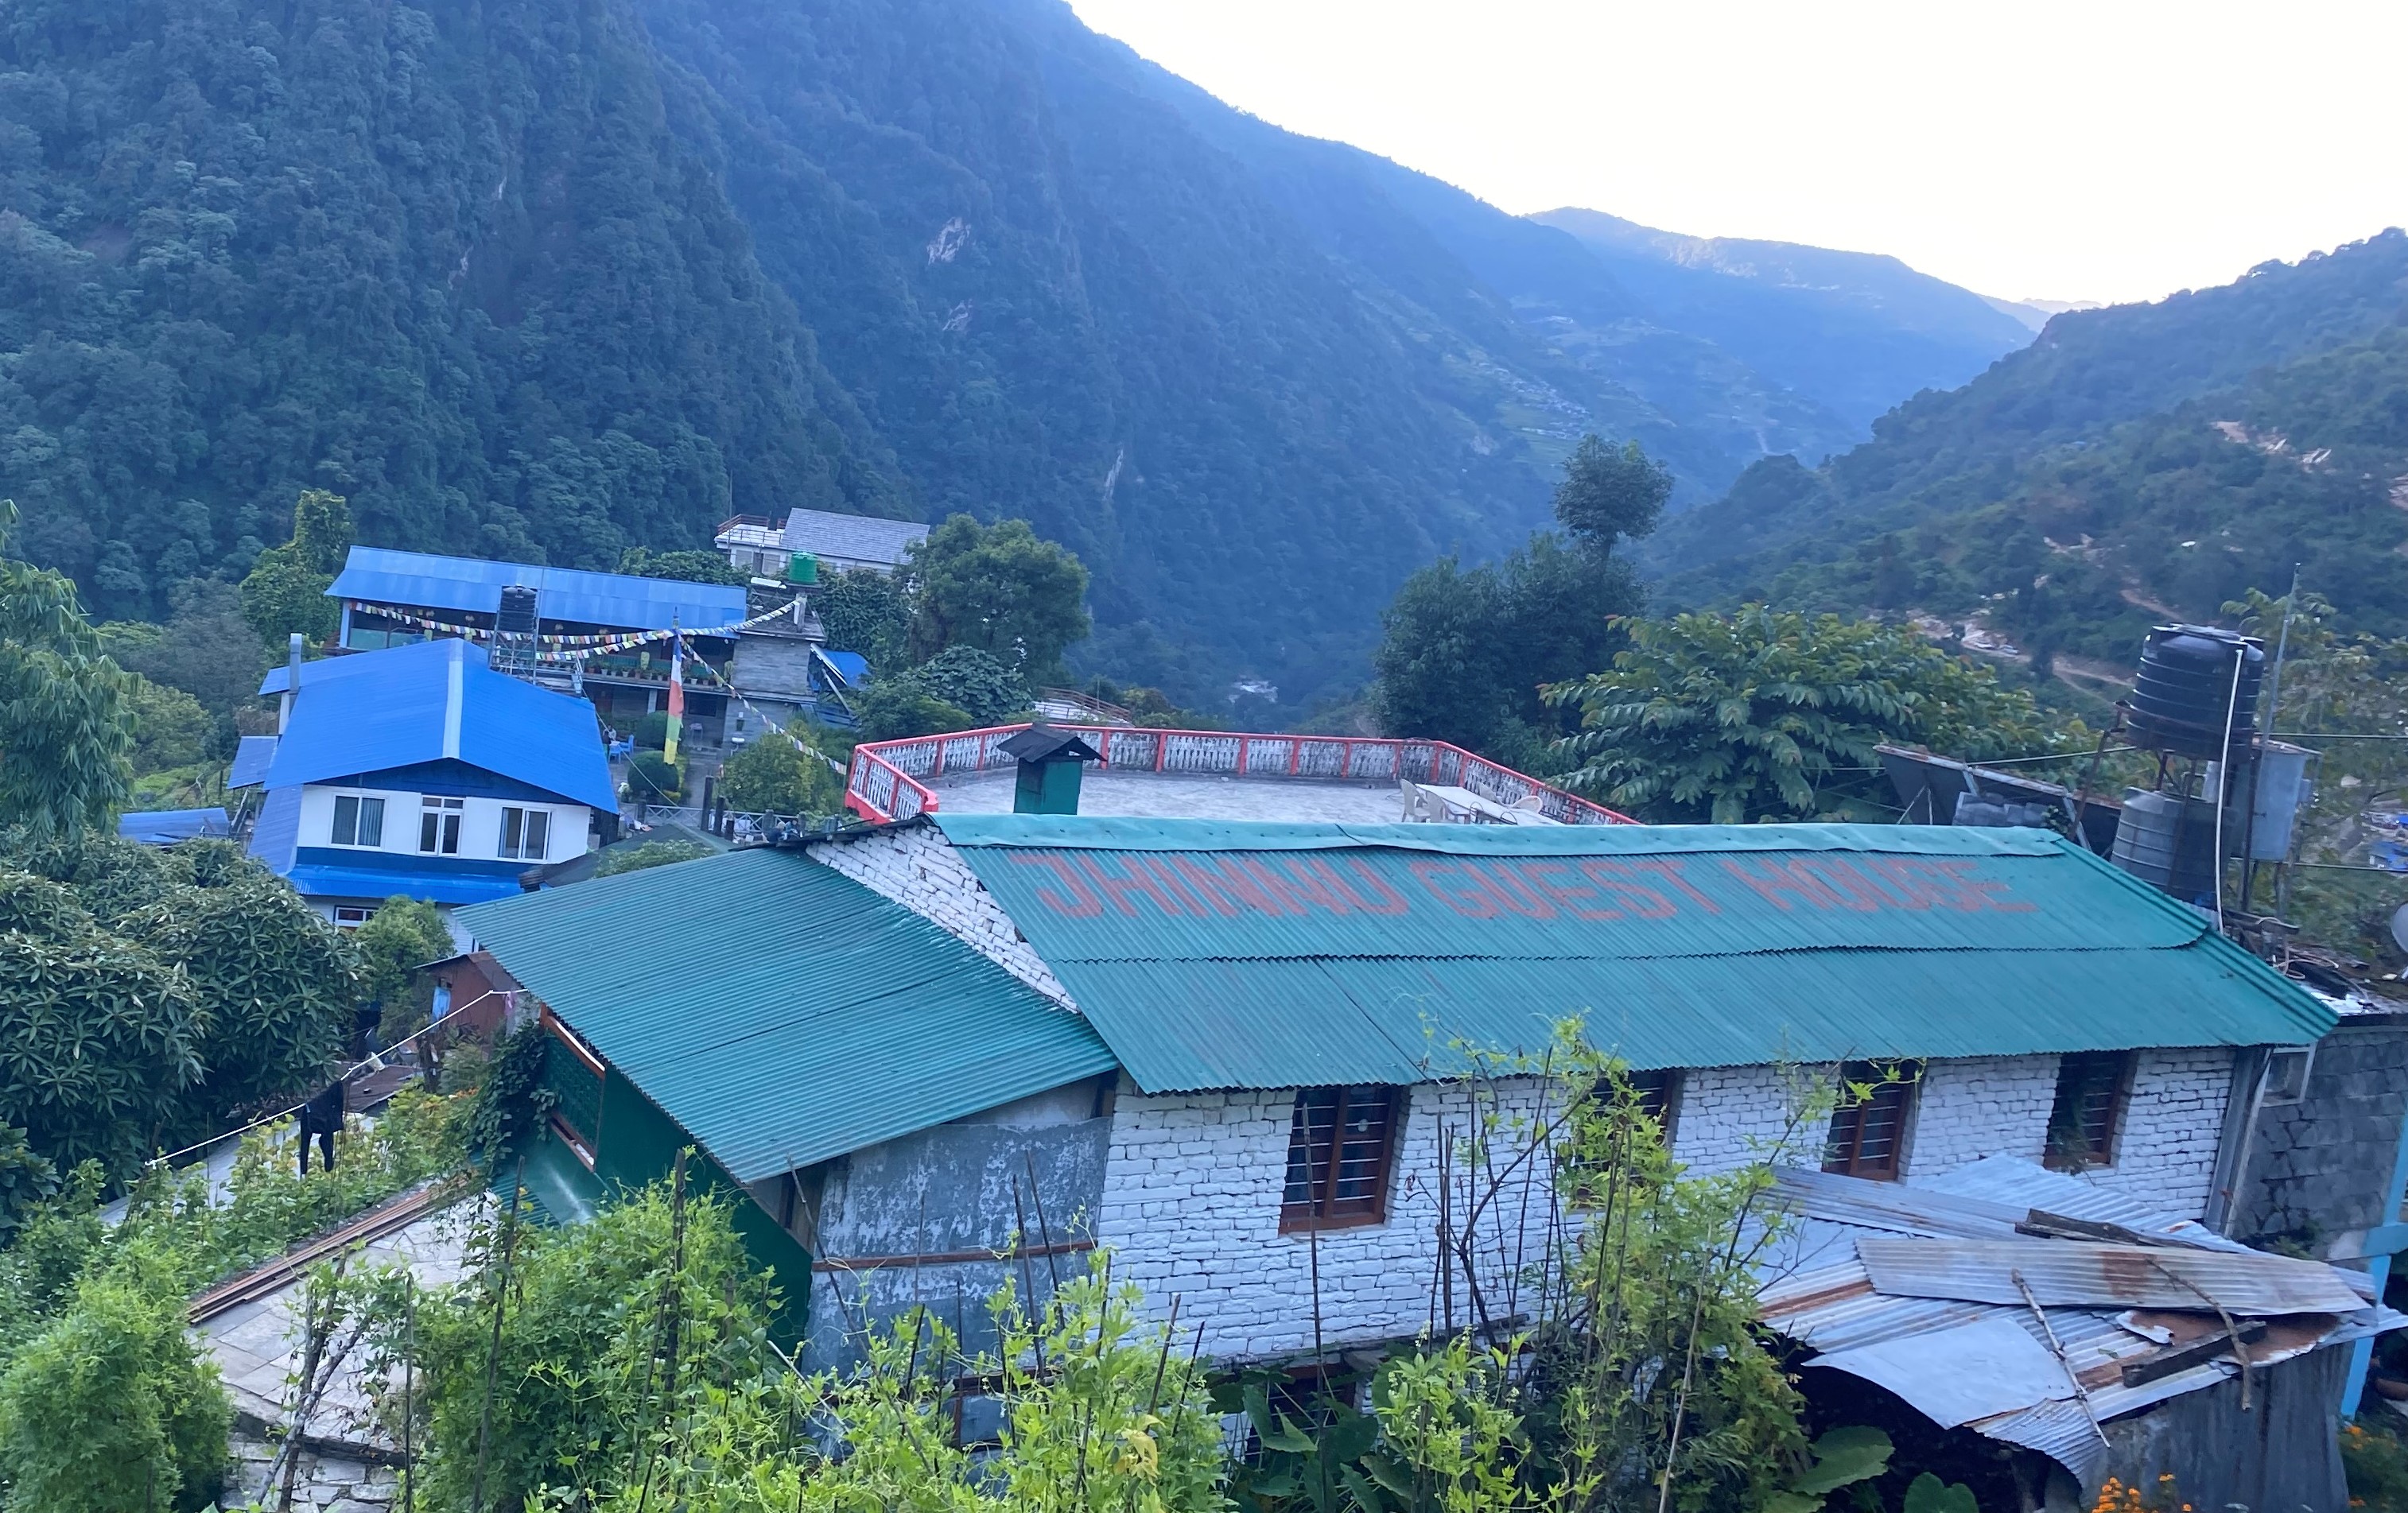 Complete List of Hotel in Jhinu Danda with Phone Number